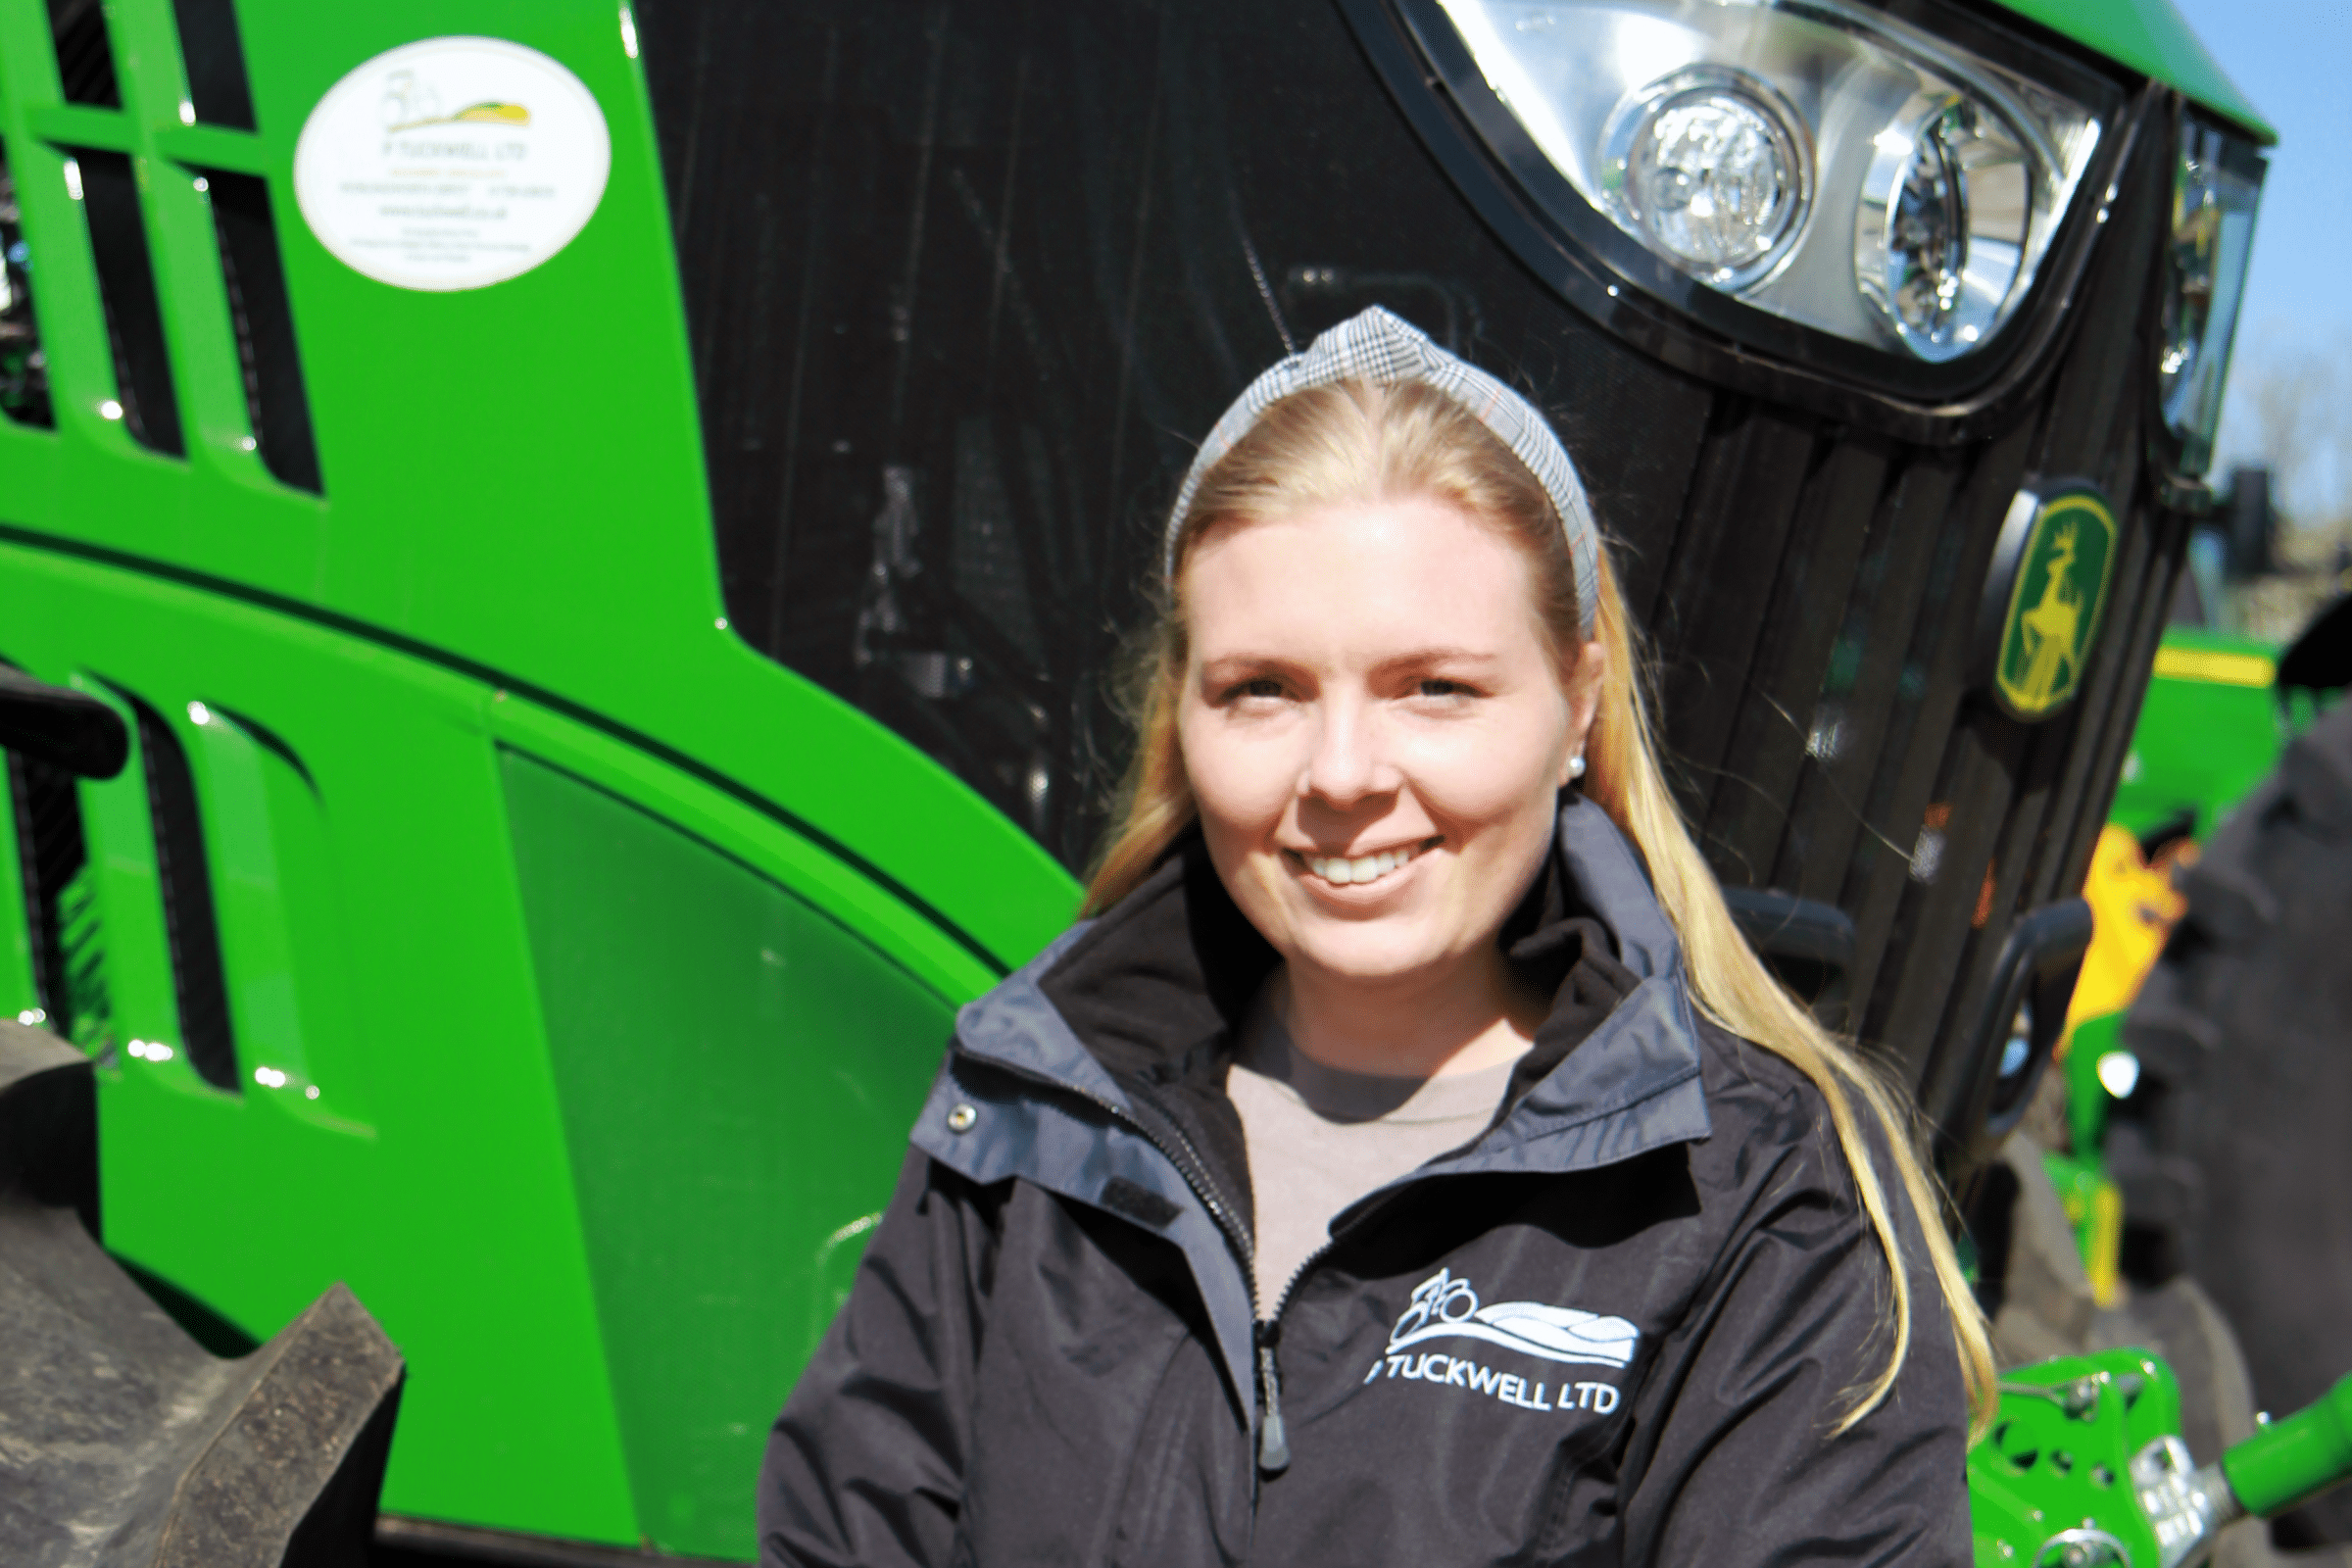 Tuckwells Jess Edwards has been shortlisted for the Suffolk Rising Star Scholarship Award!